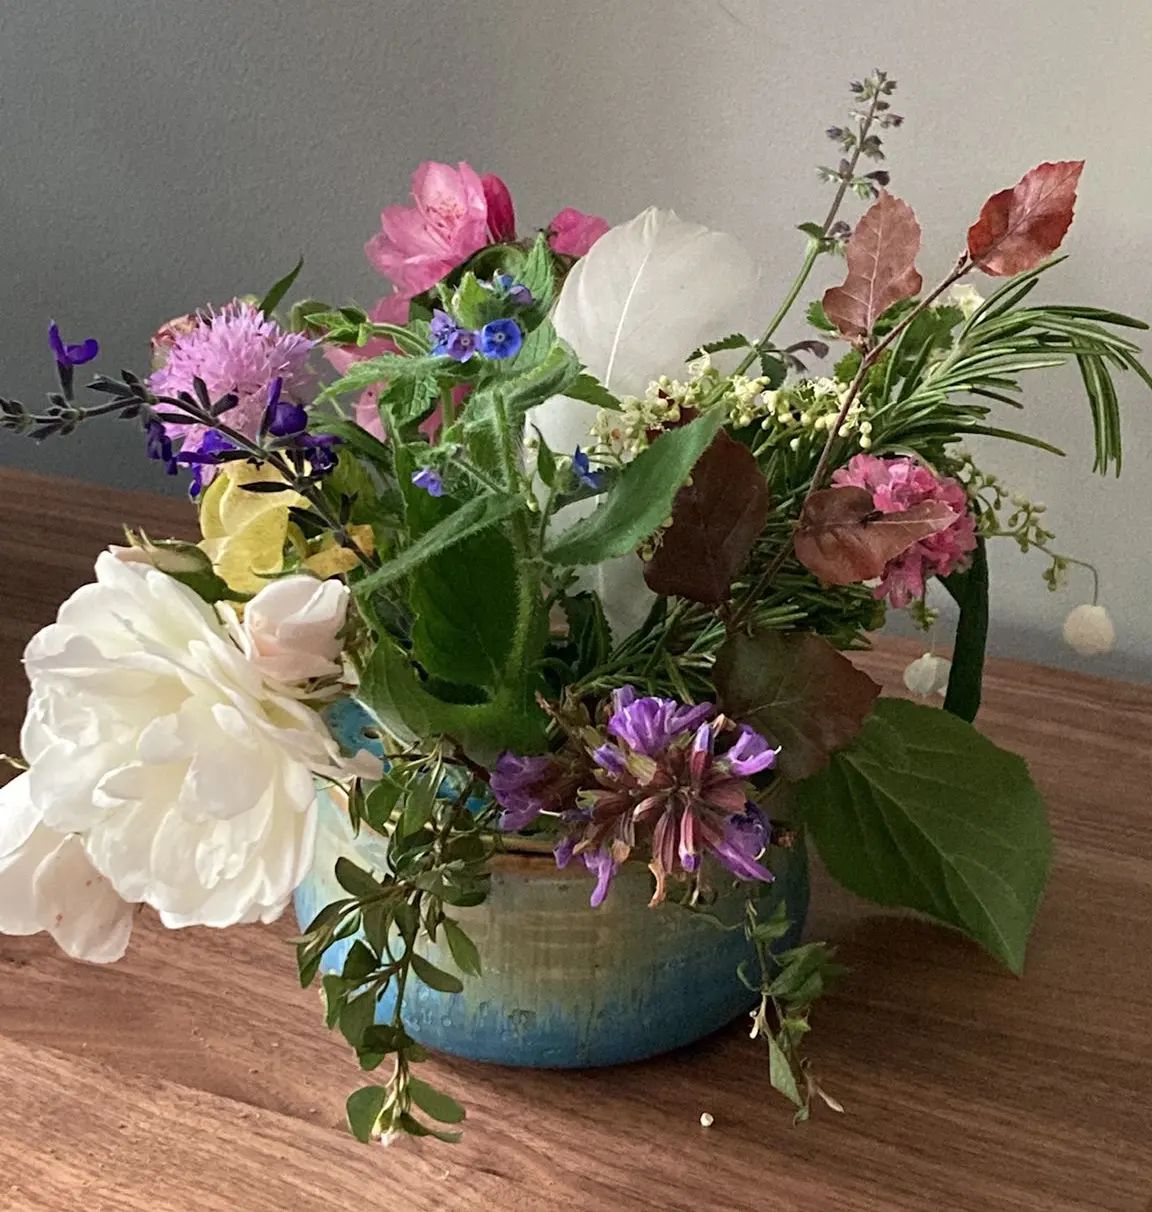 Flower frog arrangement by a customer. Love the white feather!!!This flower frog can be used as chawan and the top as soap dish. You can also burn insence cones in it. Love multi purpose items! #flowers #flowerarrangement #spring #flowerfrog #chawan #soapdish #ceramics #keramics #keramick #ceramique #multipurpose #handmade #wheelthrown #clay #stoneware #handcrafted #craftmanship #handpowered #ceramicsstudio #lifestyle #interiordesign #homedecor #homedecoration #pottery